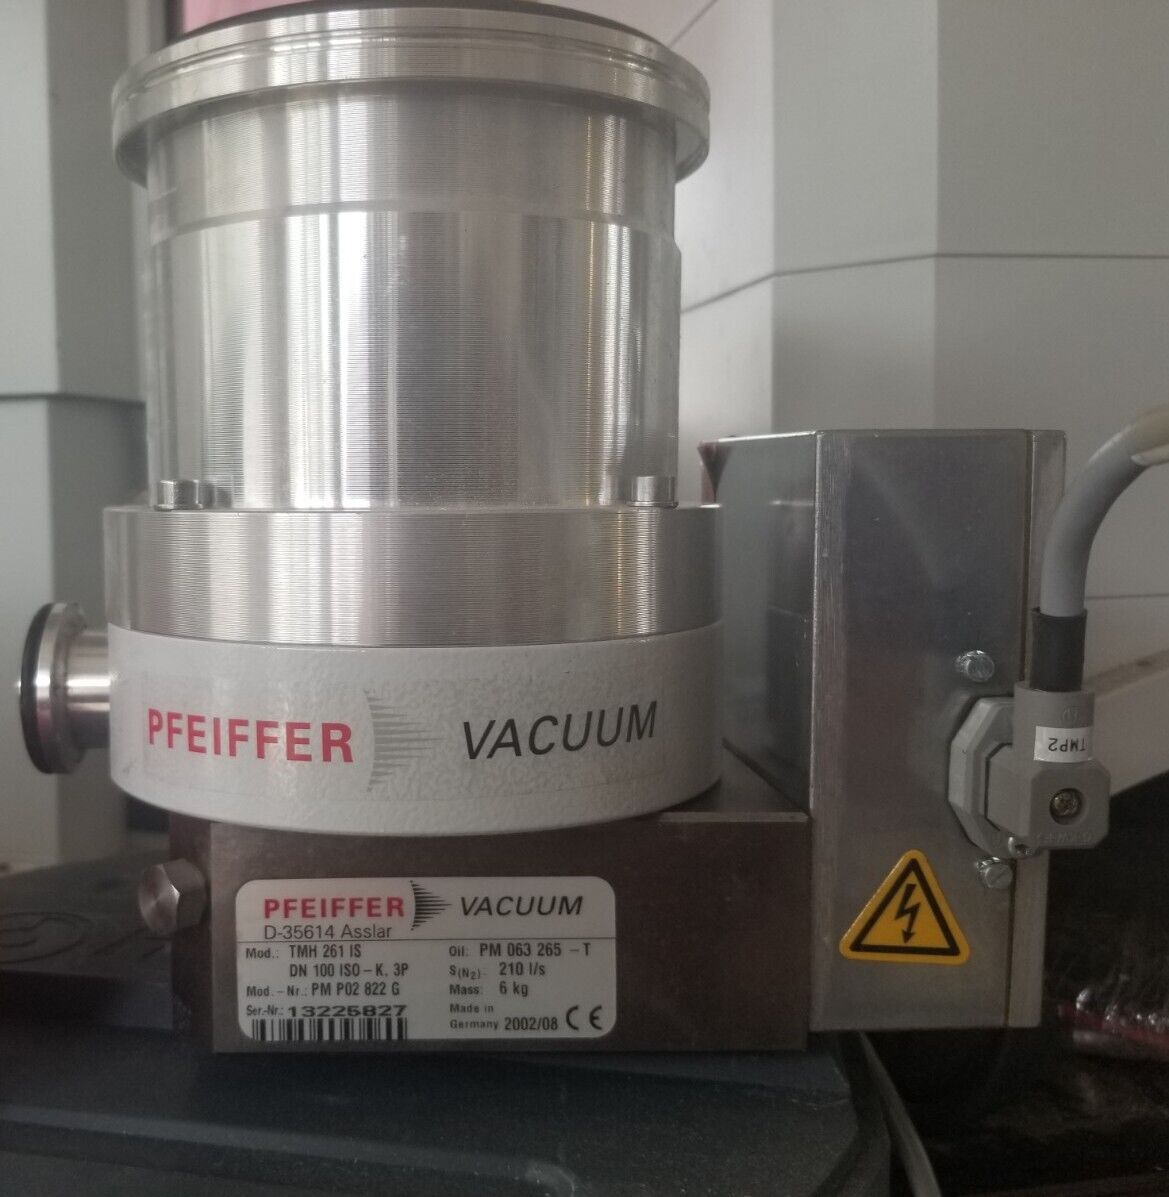 Pfeiffer Vacuum Turbo Pump TMH 261 IS With TC600 Controller Tested GUARANTEED